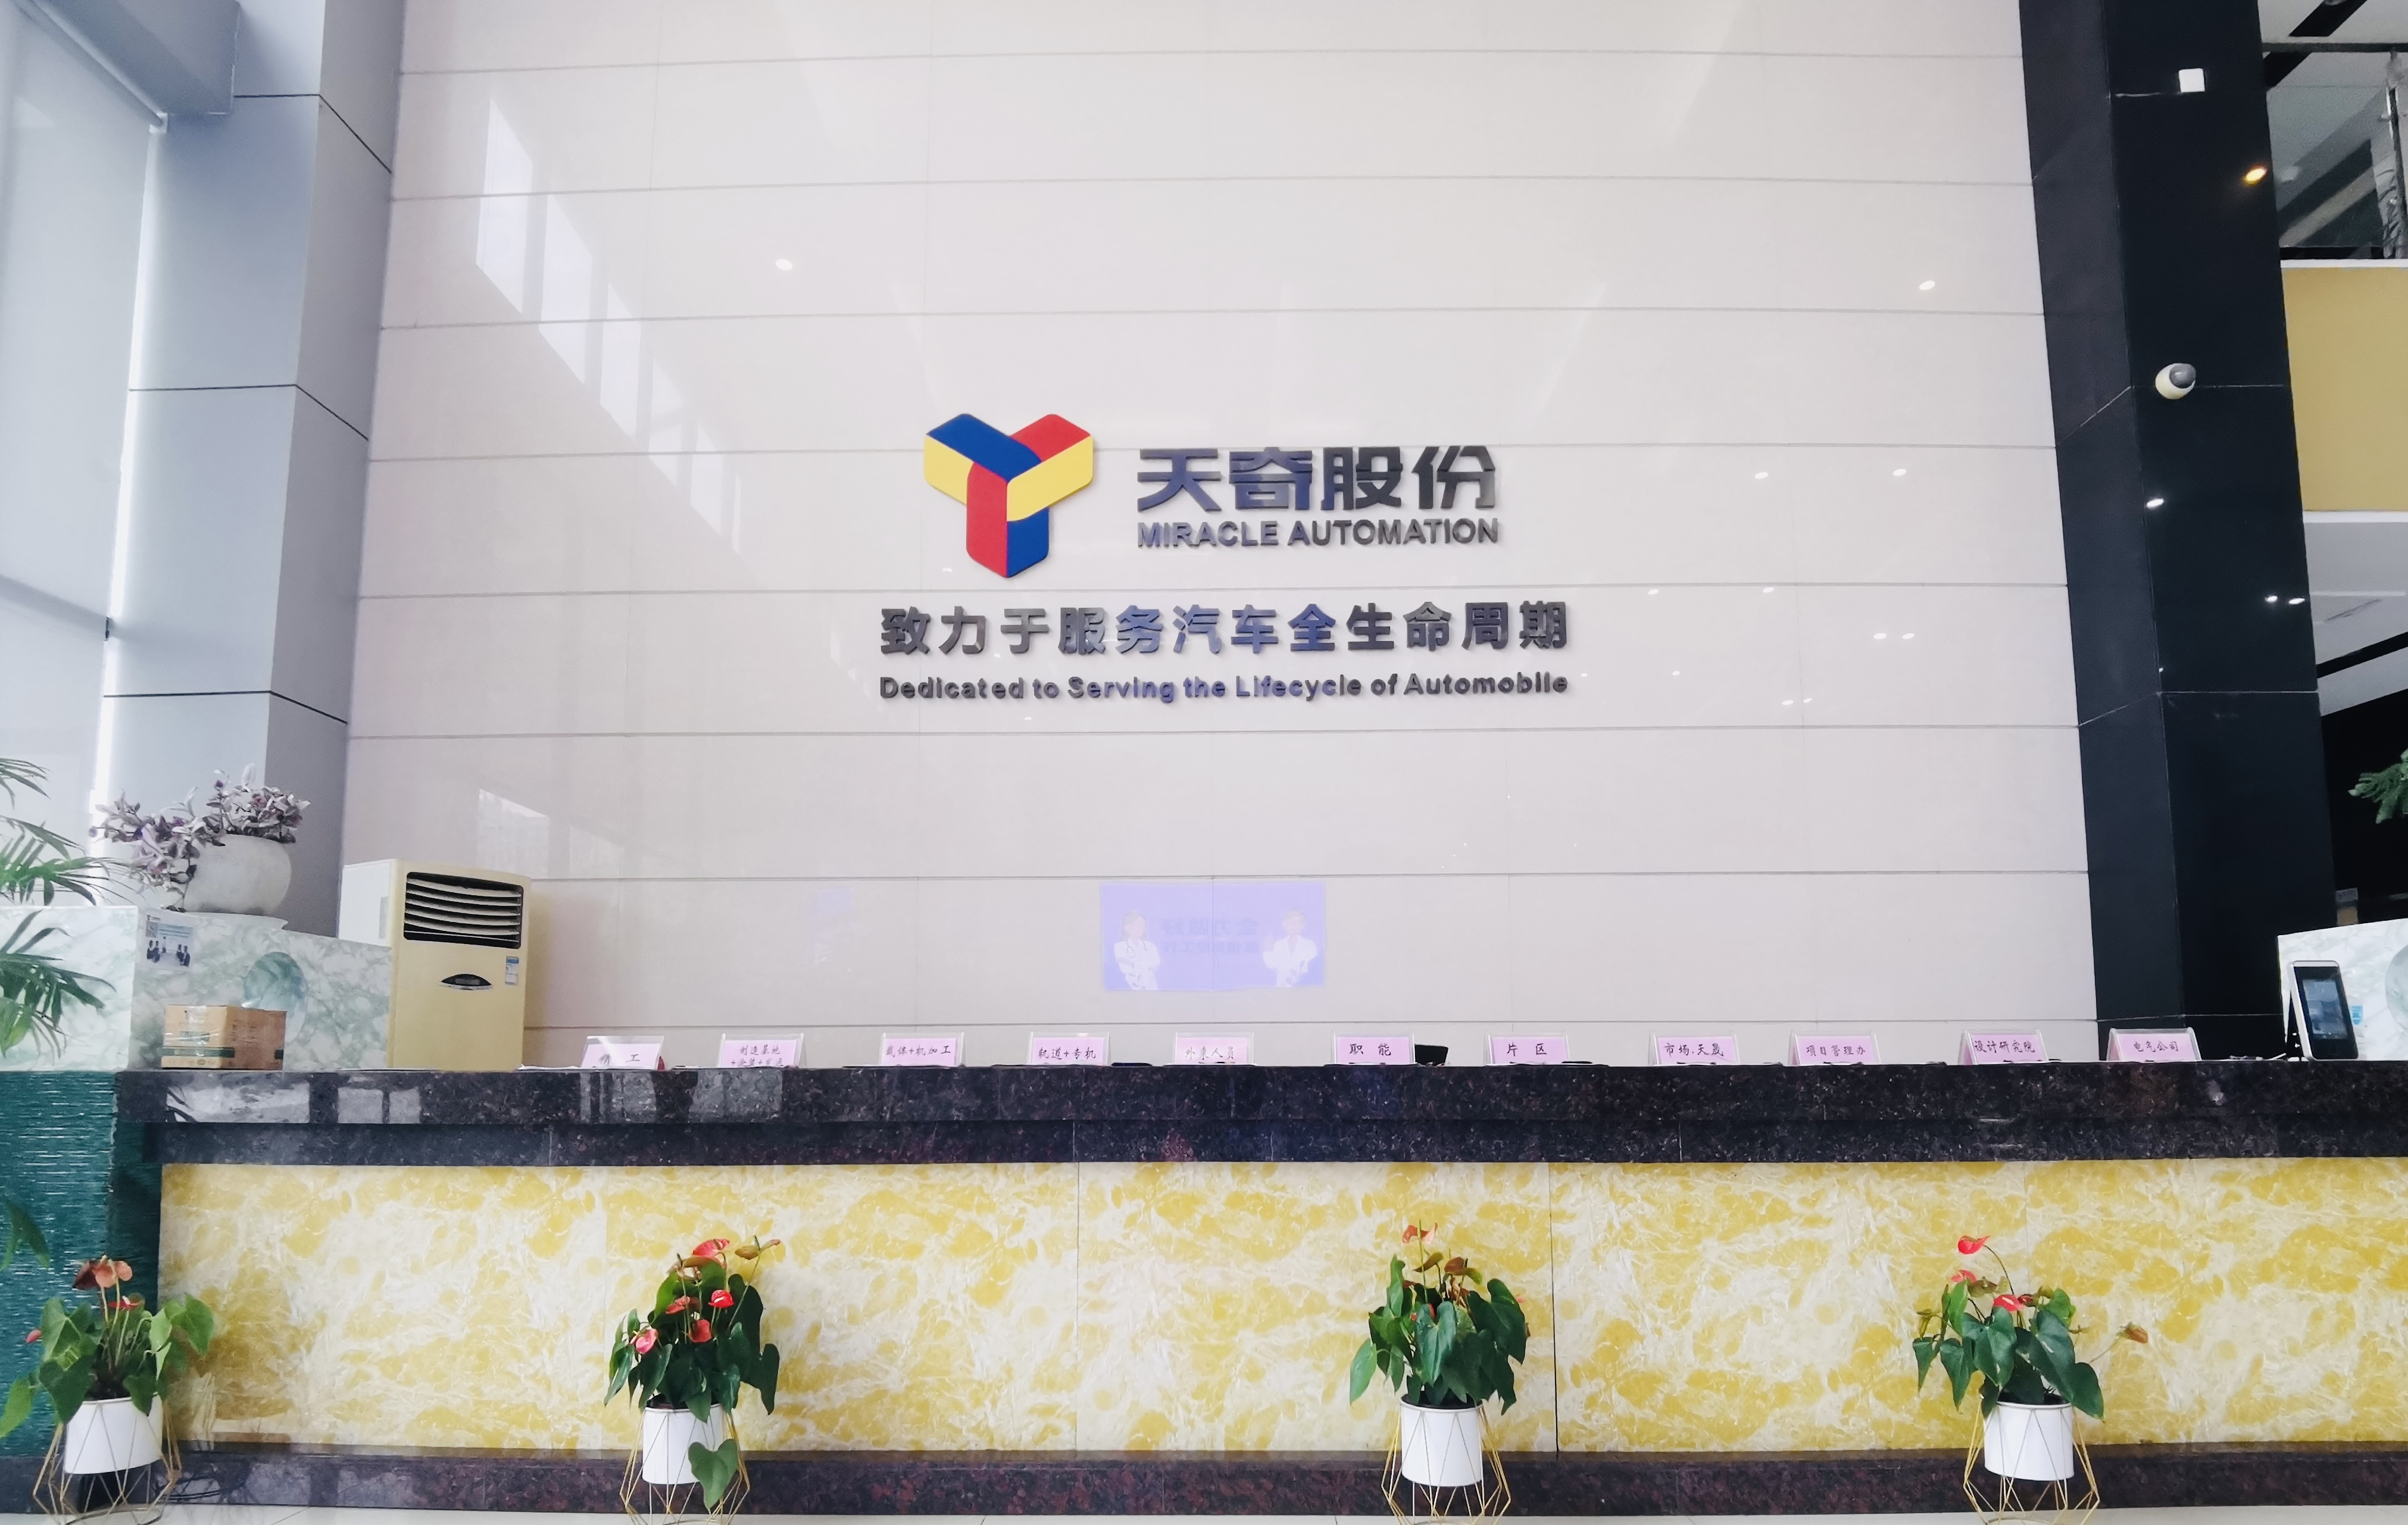 【ag九游会官网登录】Yicai Global: China’s Miracle Automation teams up with Japan’s Mitsui on green battery recycling plant(图1)